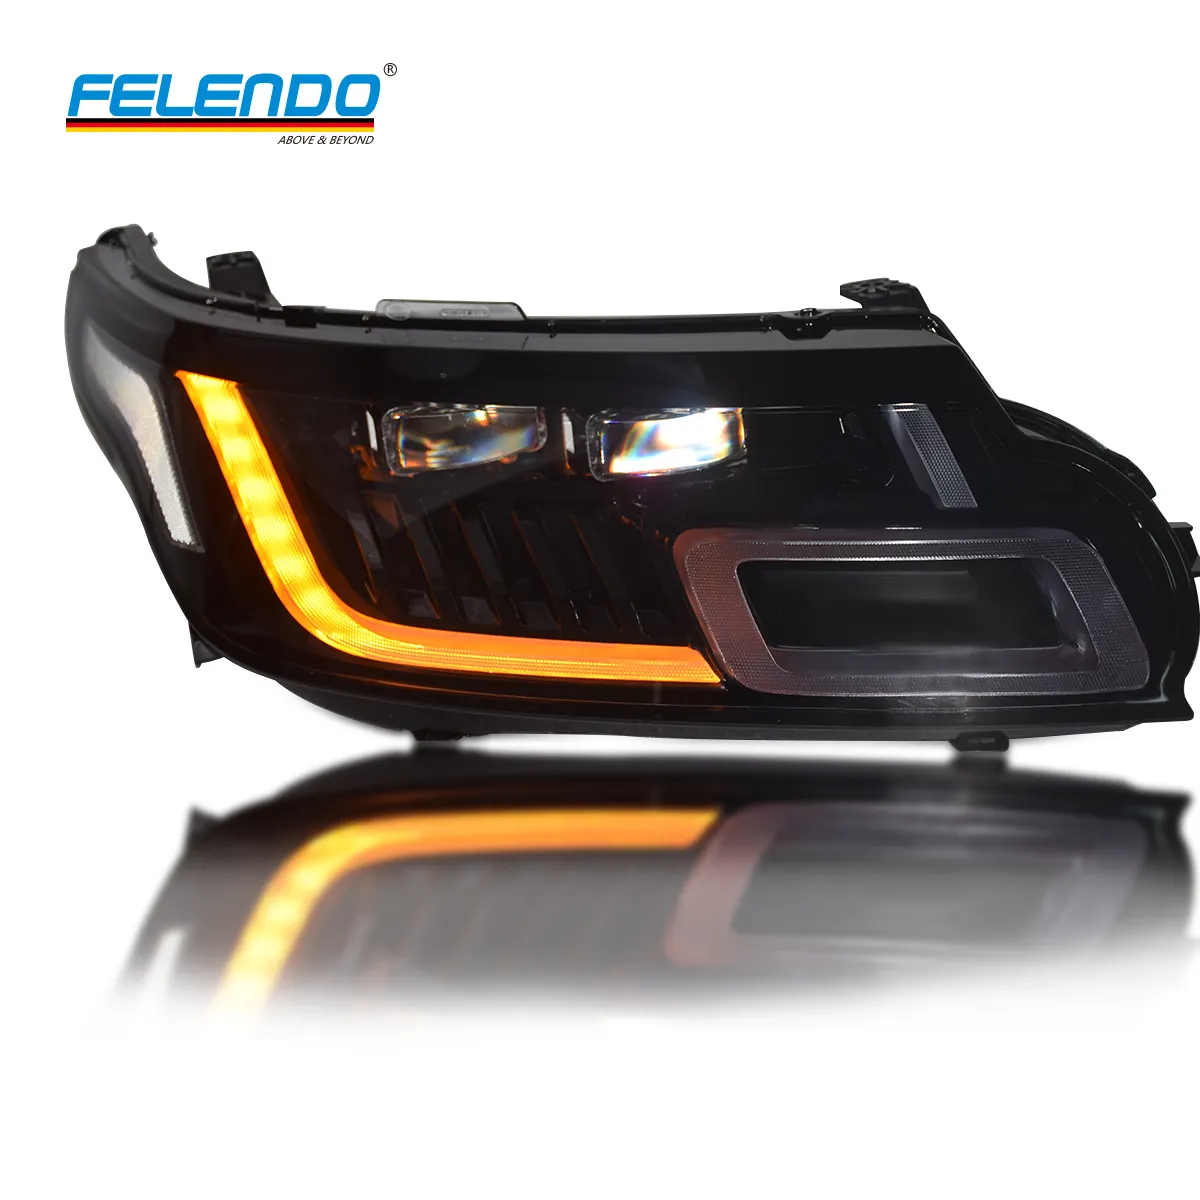 New Design Plug and Play No Replacement Bumper Upgrade 2018 2 Lens LED Headlight For Range Rover Sport 2014-2017